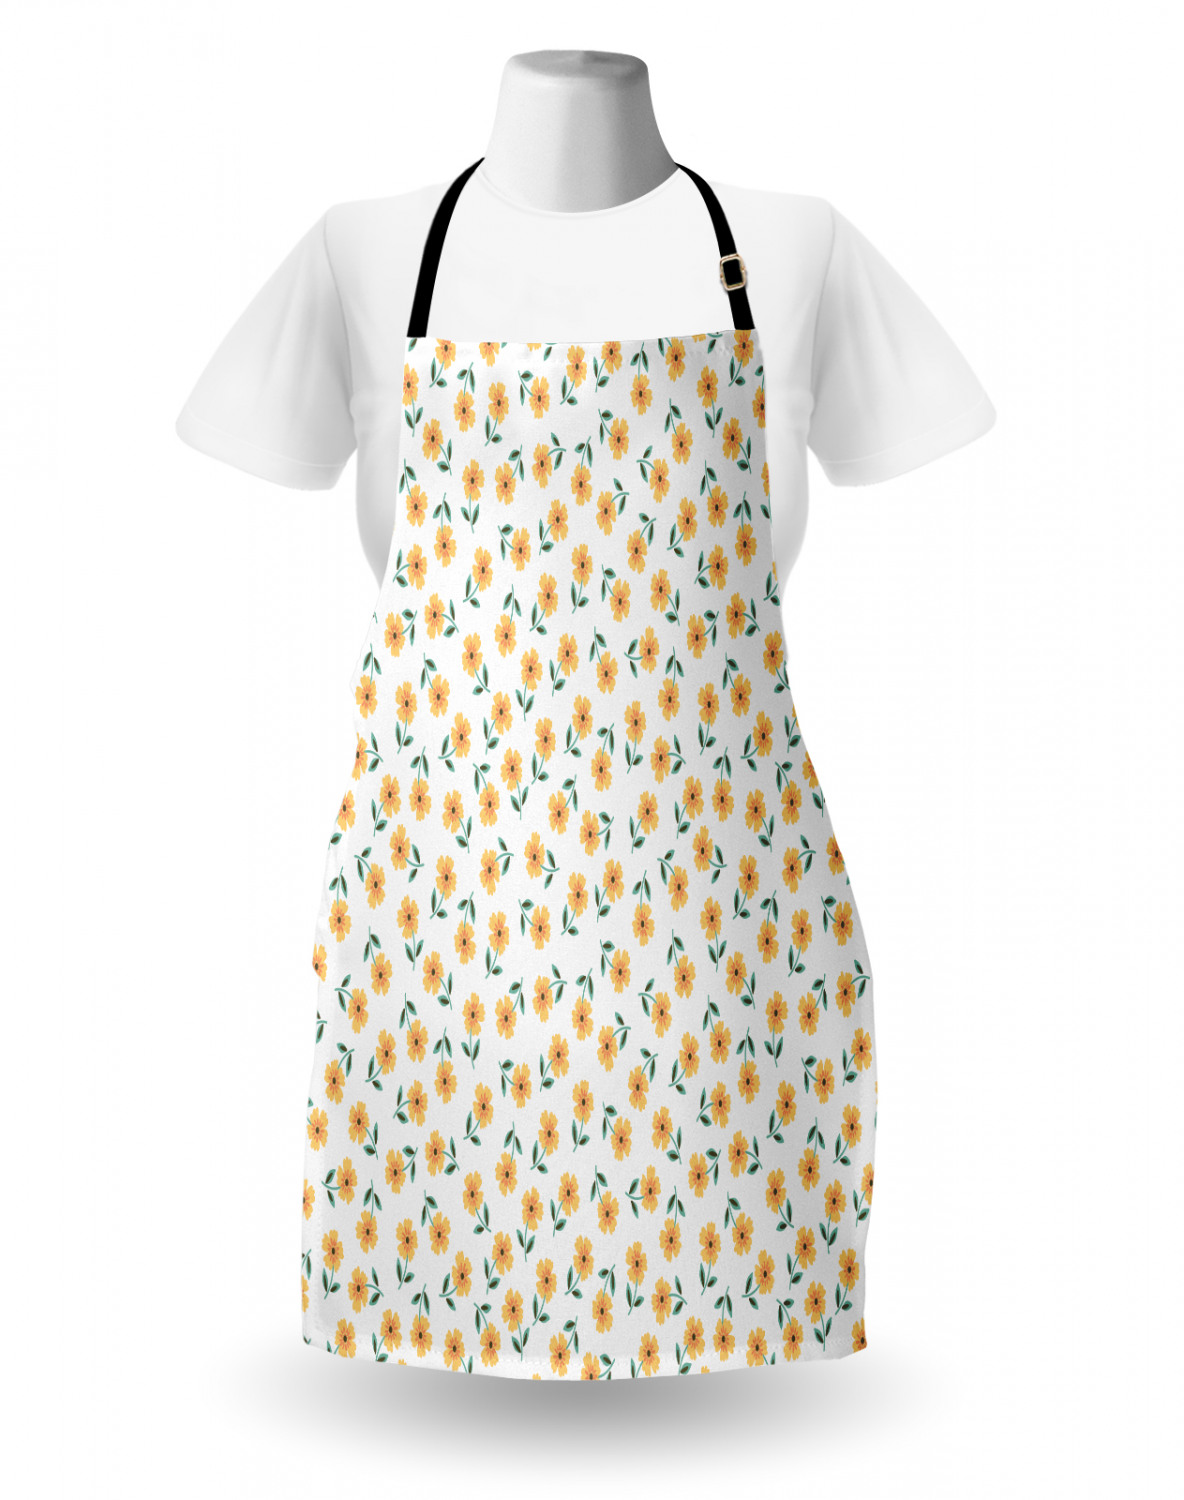 Details about   Ambesonne Apron Bib Adjustable Neck for Gardening Cooking Durable 